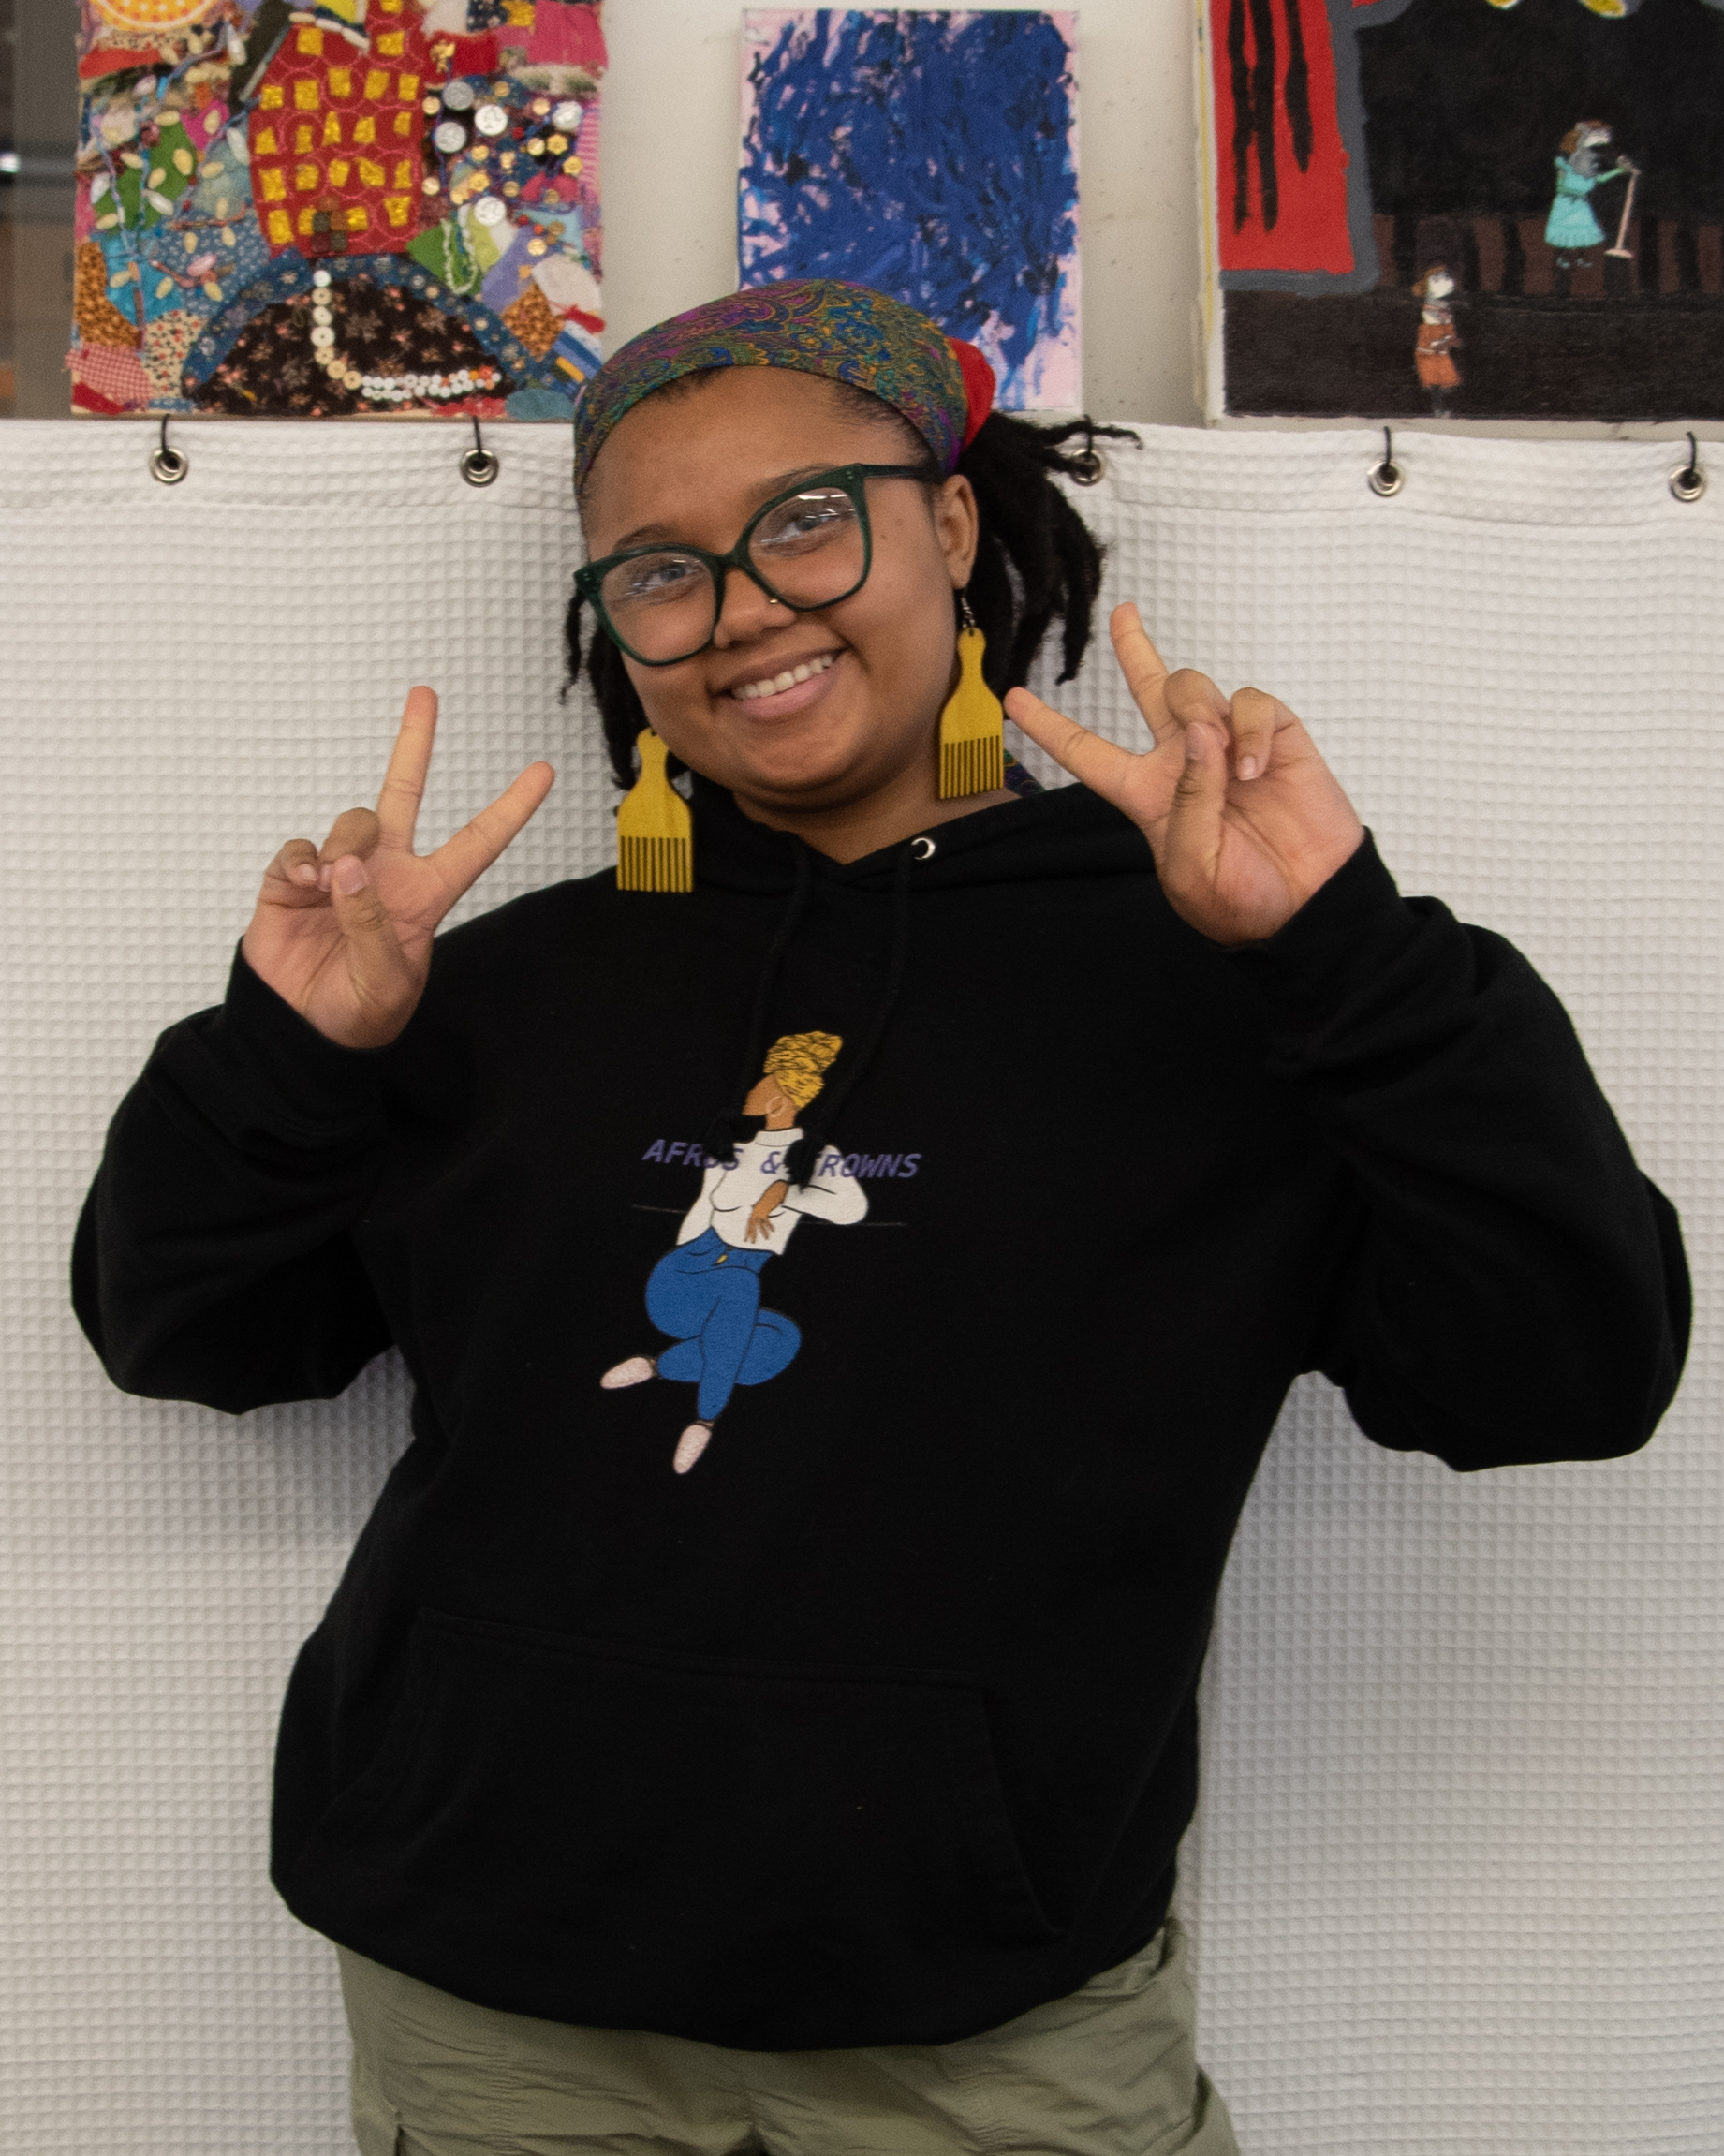 photo of Ketsia Leroy, a young woman with brown skin and dark, textured hair pulled back in a decorative bandana/scarf. She is wearing big glasses, large yellow earrings in the shape of Afro picks and a black, hooded sweatshirt with an image of a digital drawing of a woman and the words Afros and Crowns 